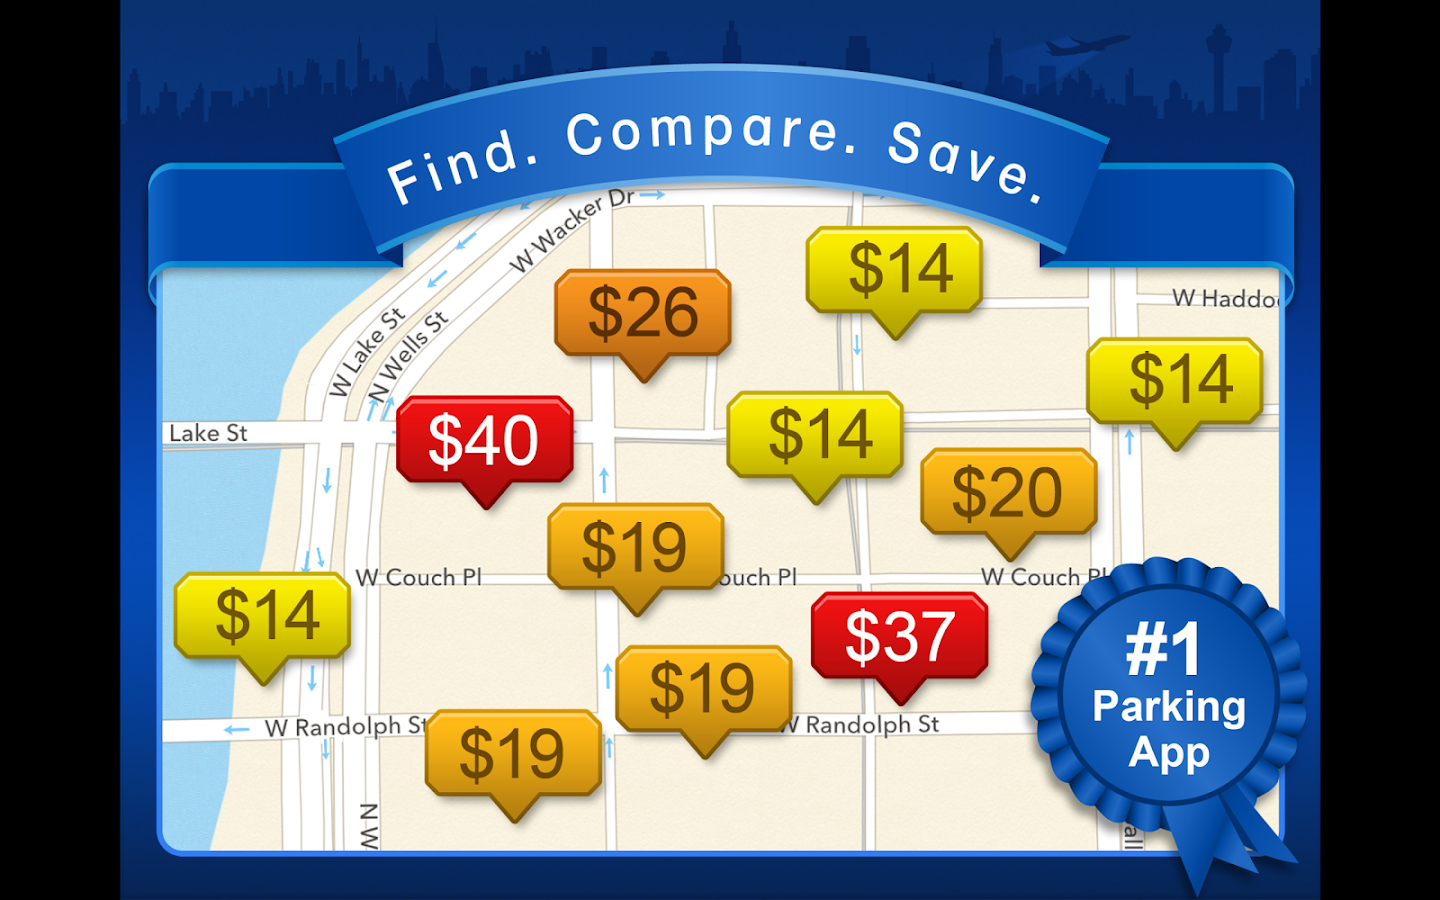 What are some ways to find The Parking Spot coupons?